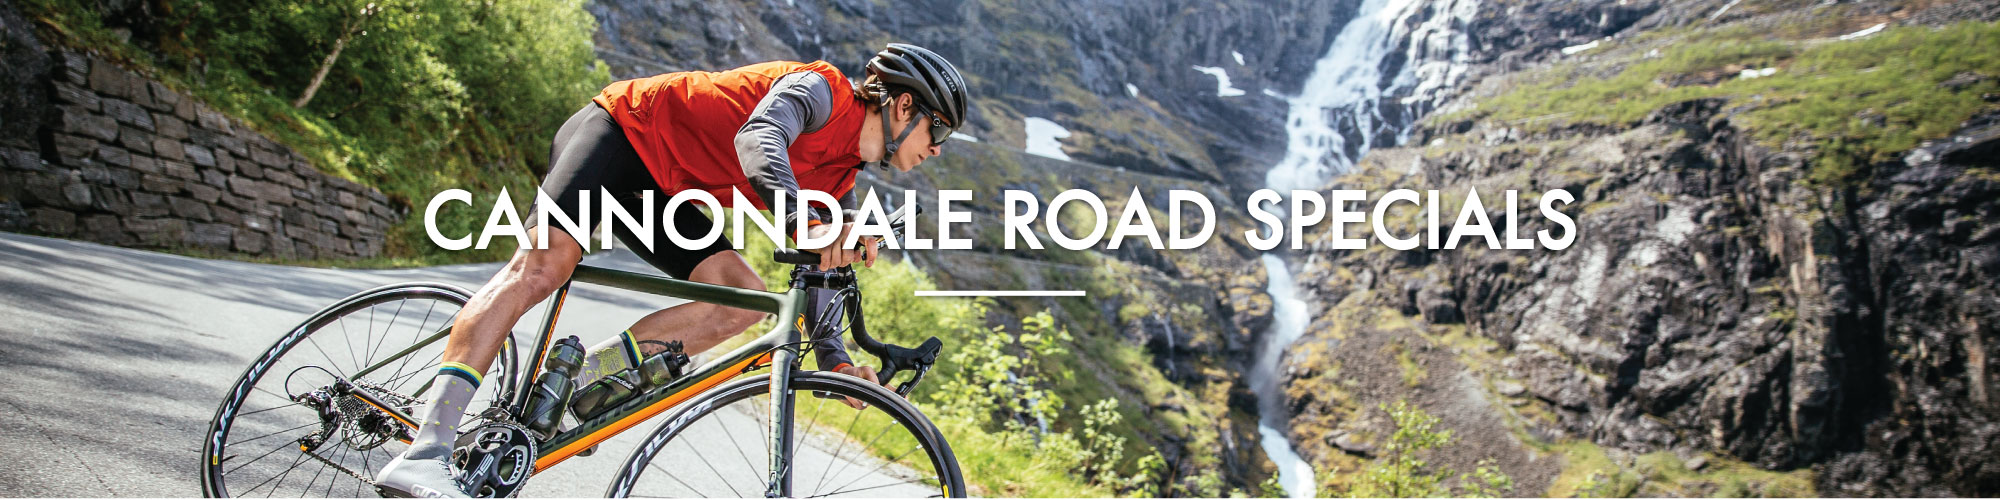 Shop Sale Cannondale Road Bikes from Bicycle Sports Pacific